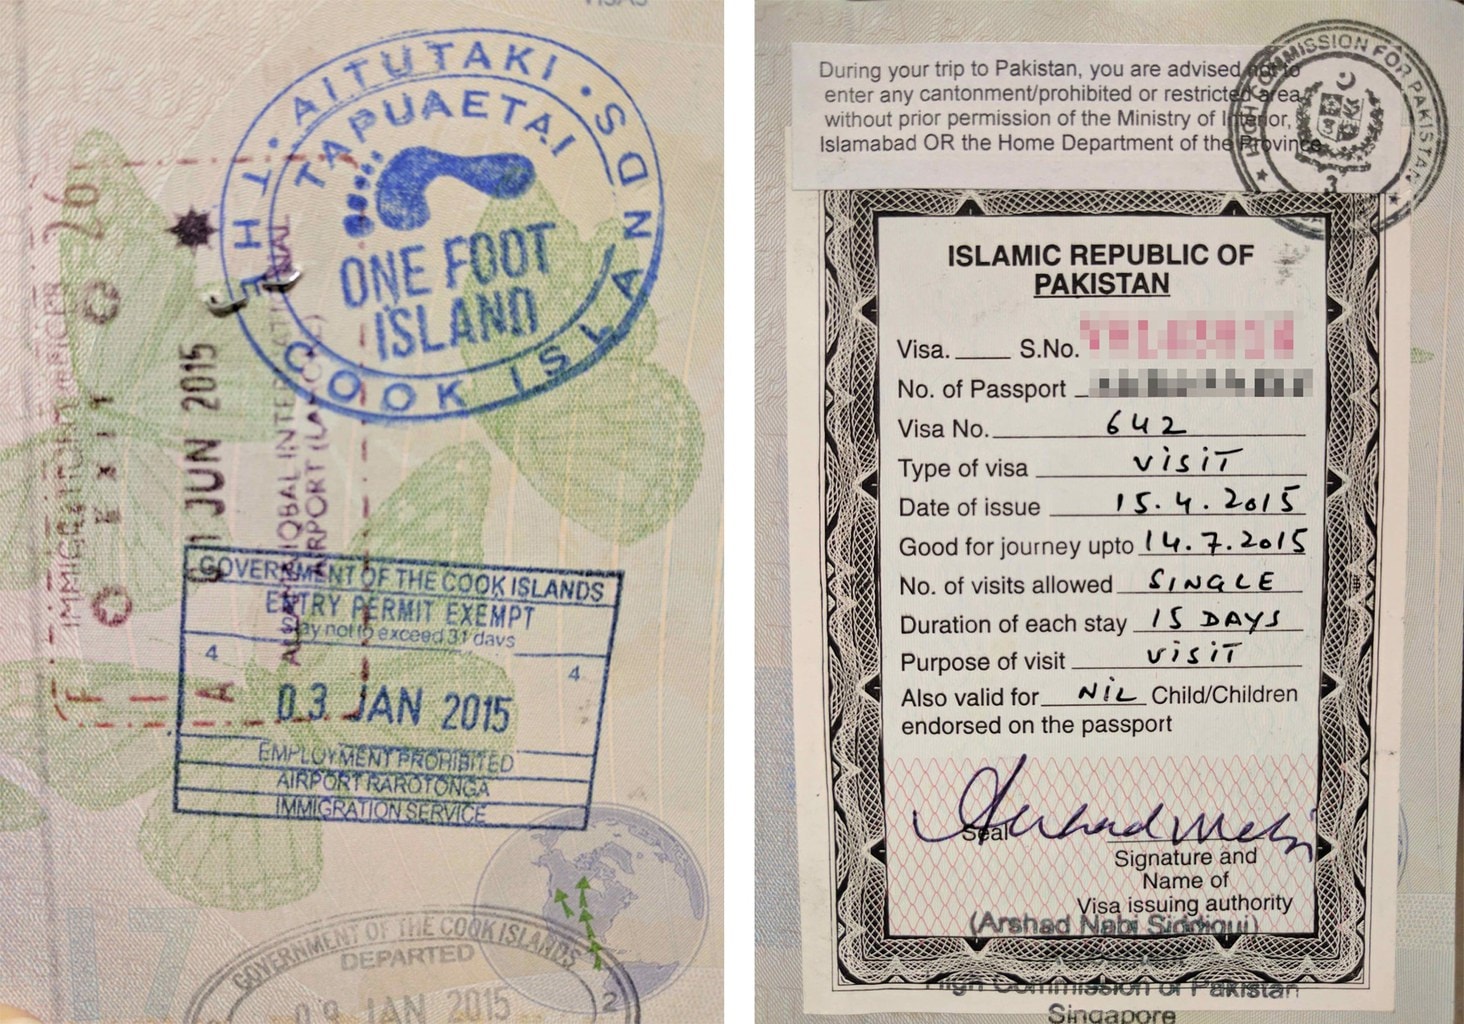 Passport stamps for One Foot Island and Pakistan